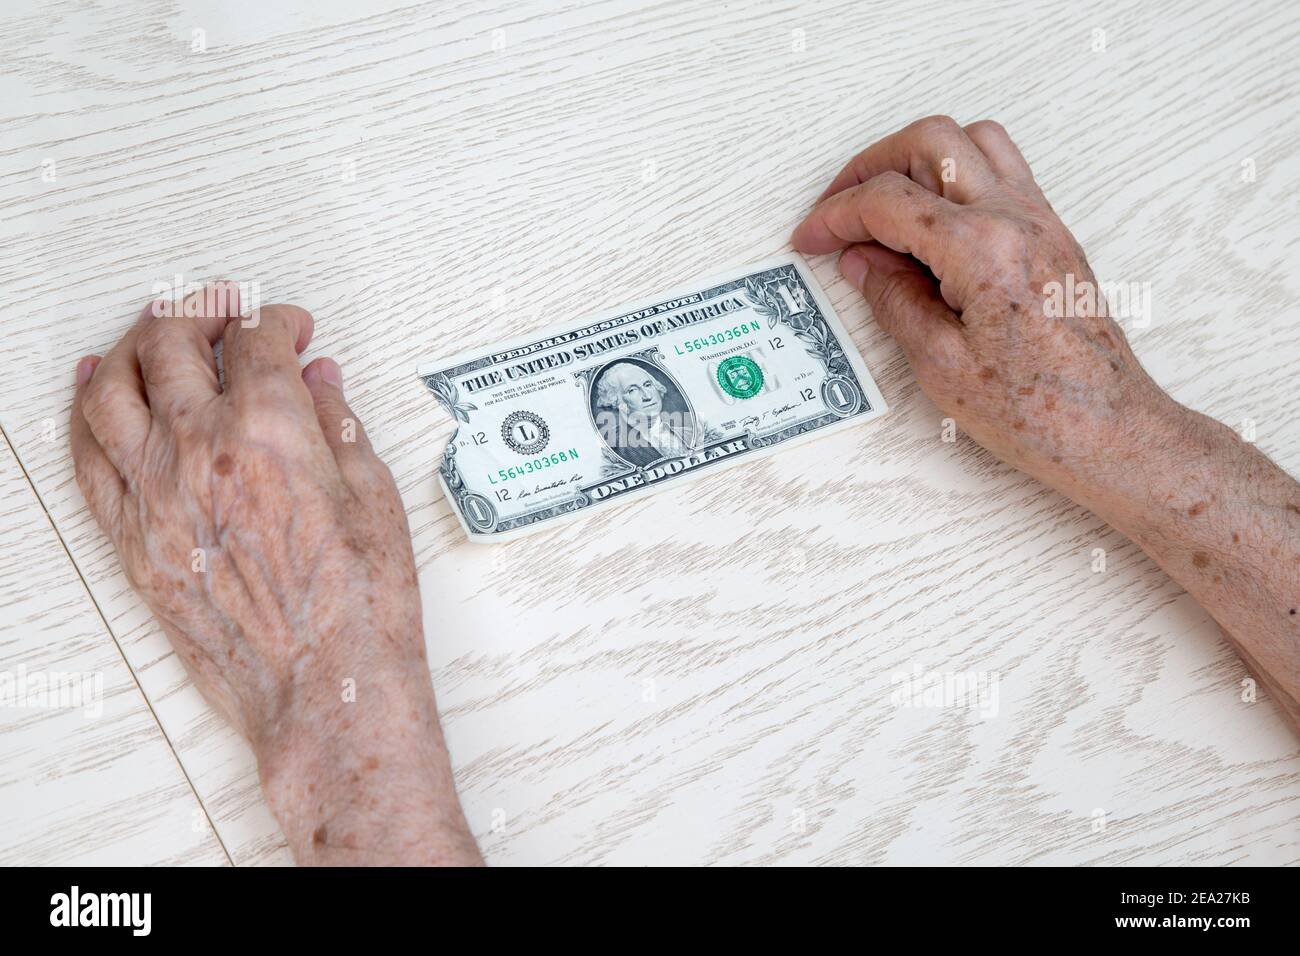 Hands of an elderly woman close-up lie on the table. Between them is 1 old ragged dollar. The concept of despair, poverty, lack of money for basic thi Stock Photo